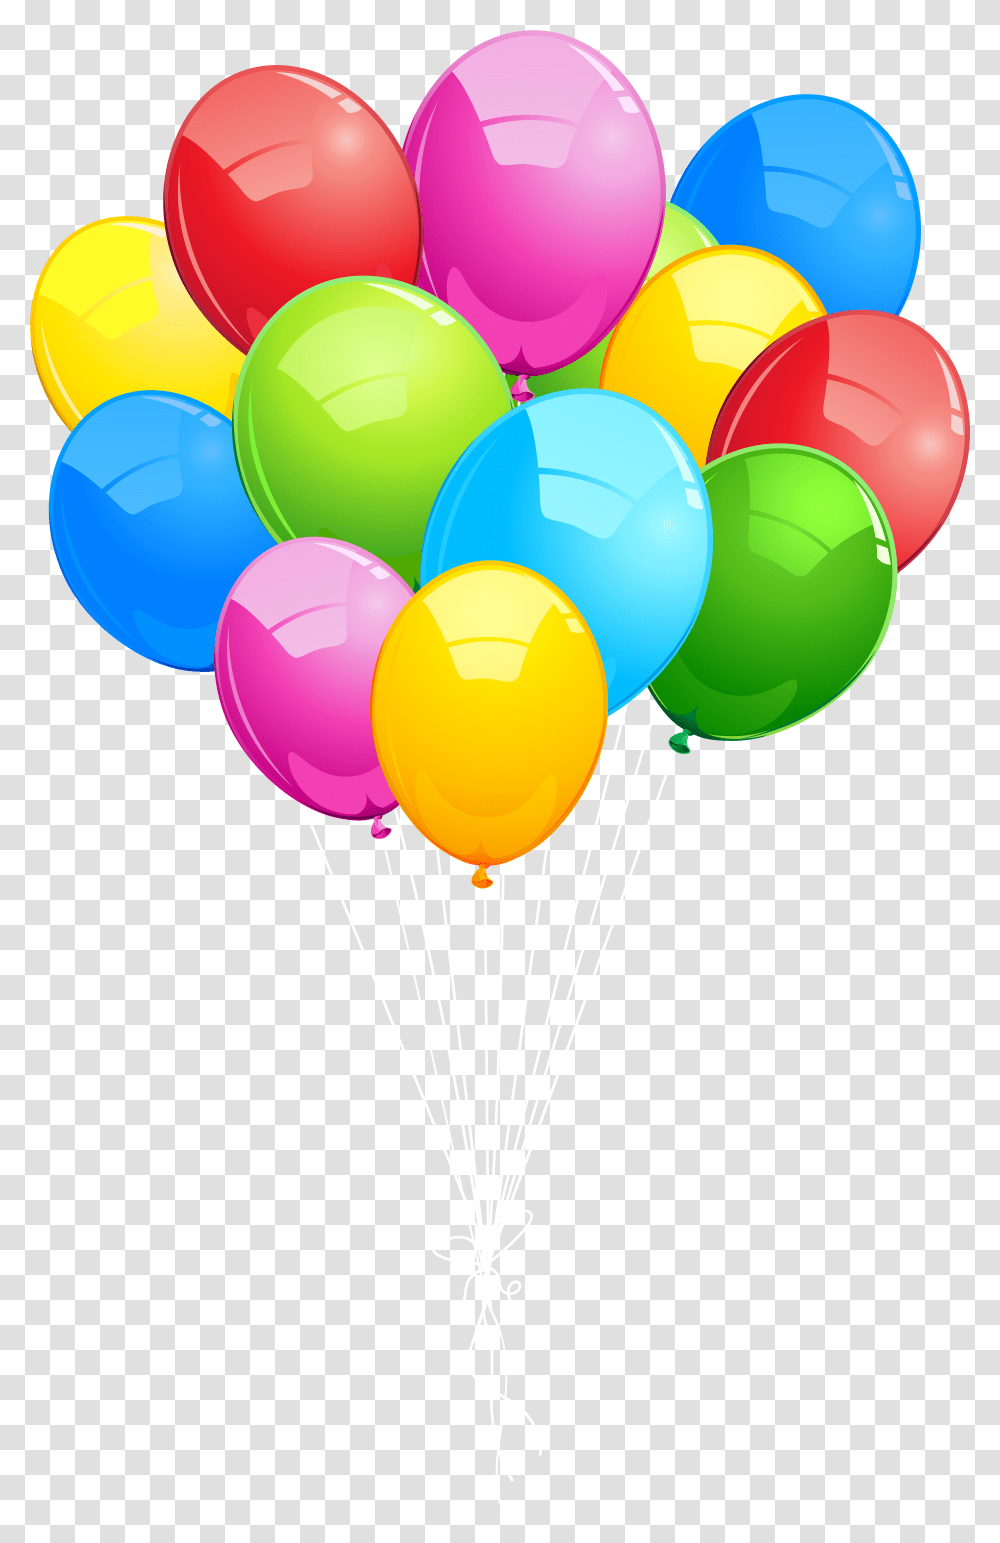 Bunch Balloons Clip Art Image Bunch Of Balloons Clipart Transparent Png